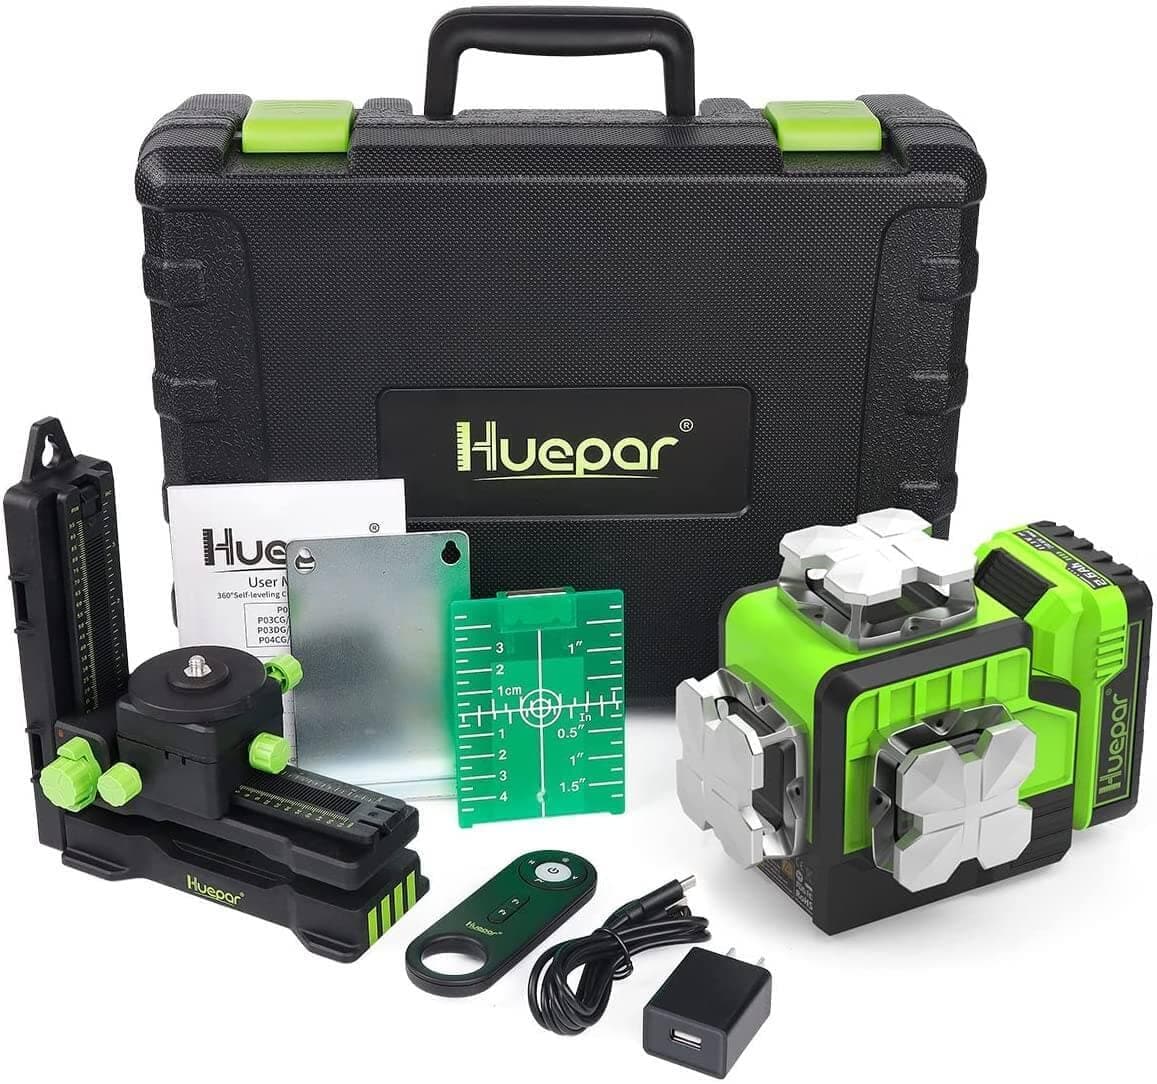 Why Green Lasers are Better: A Review of the Huepar P03CG (Laser Level) 